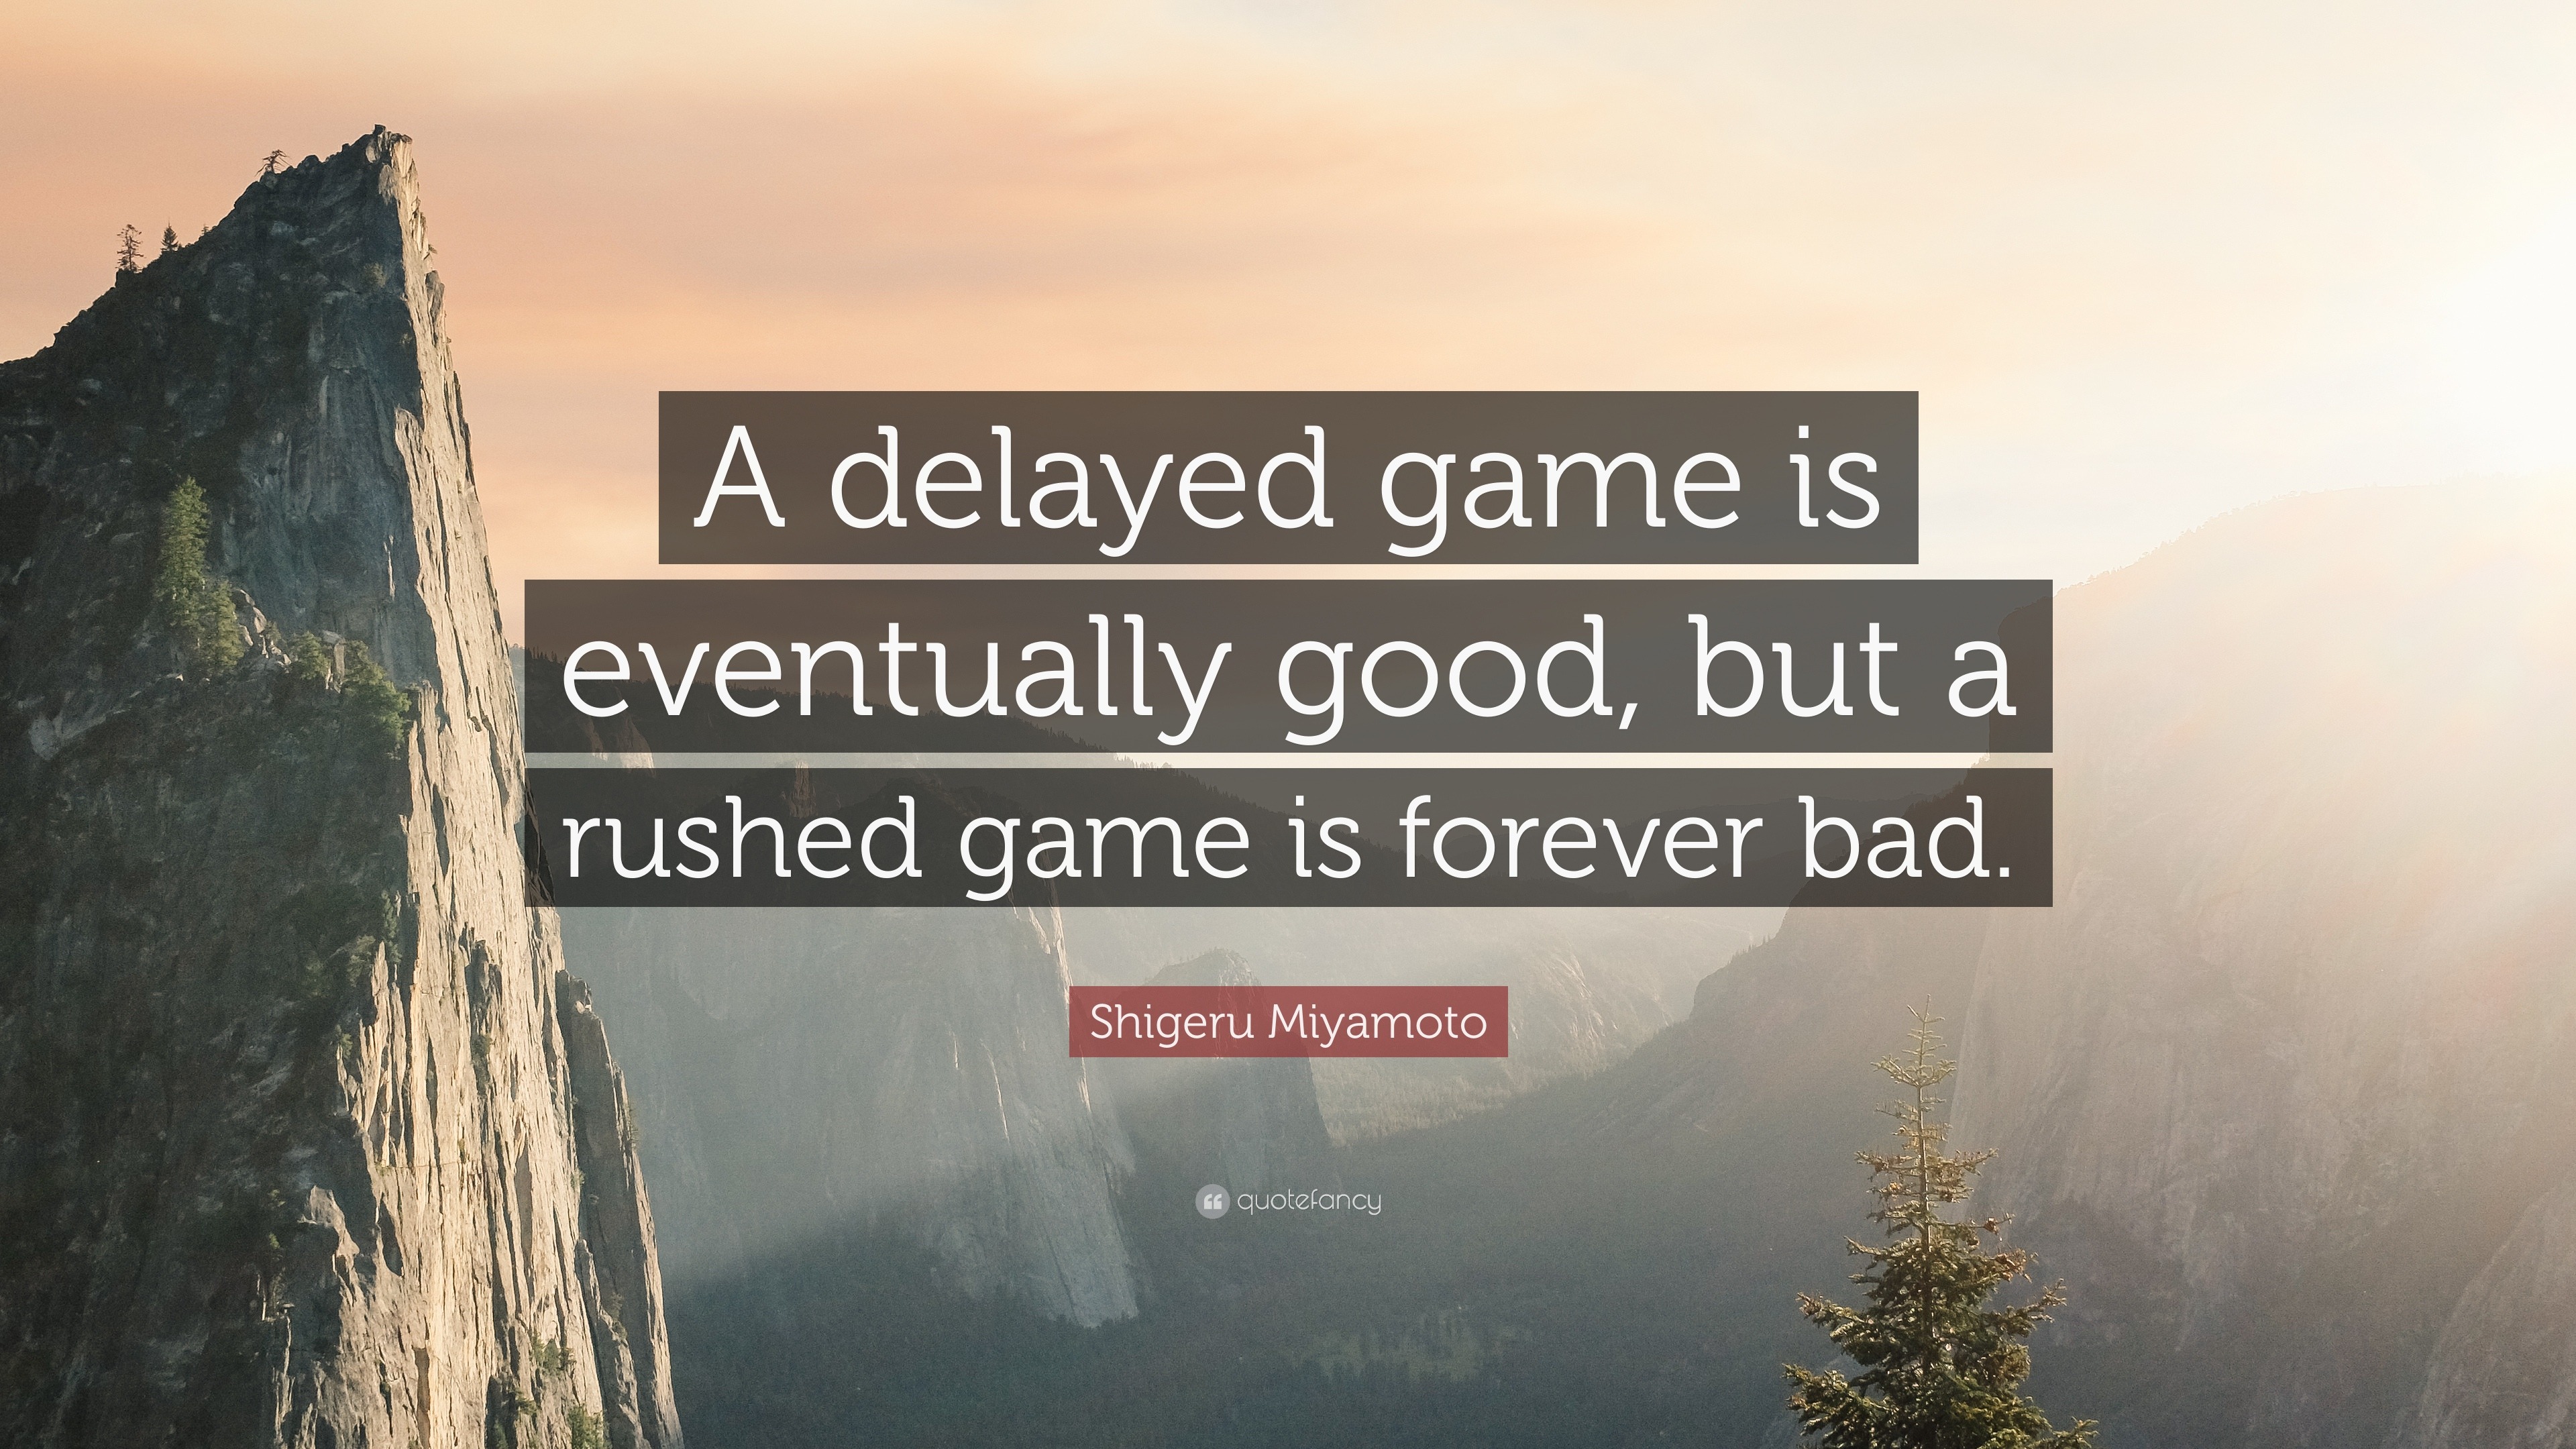 1026552-Shigeru-Miyamoto-Quote-A-delayed-game-is-eventually-good-but-a.jpg